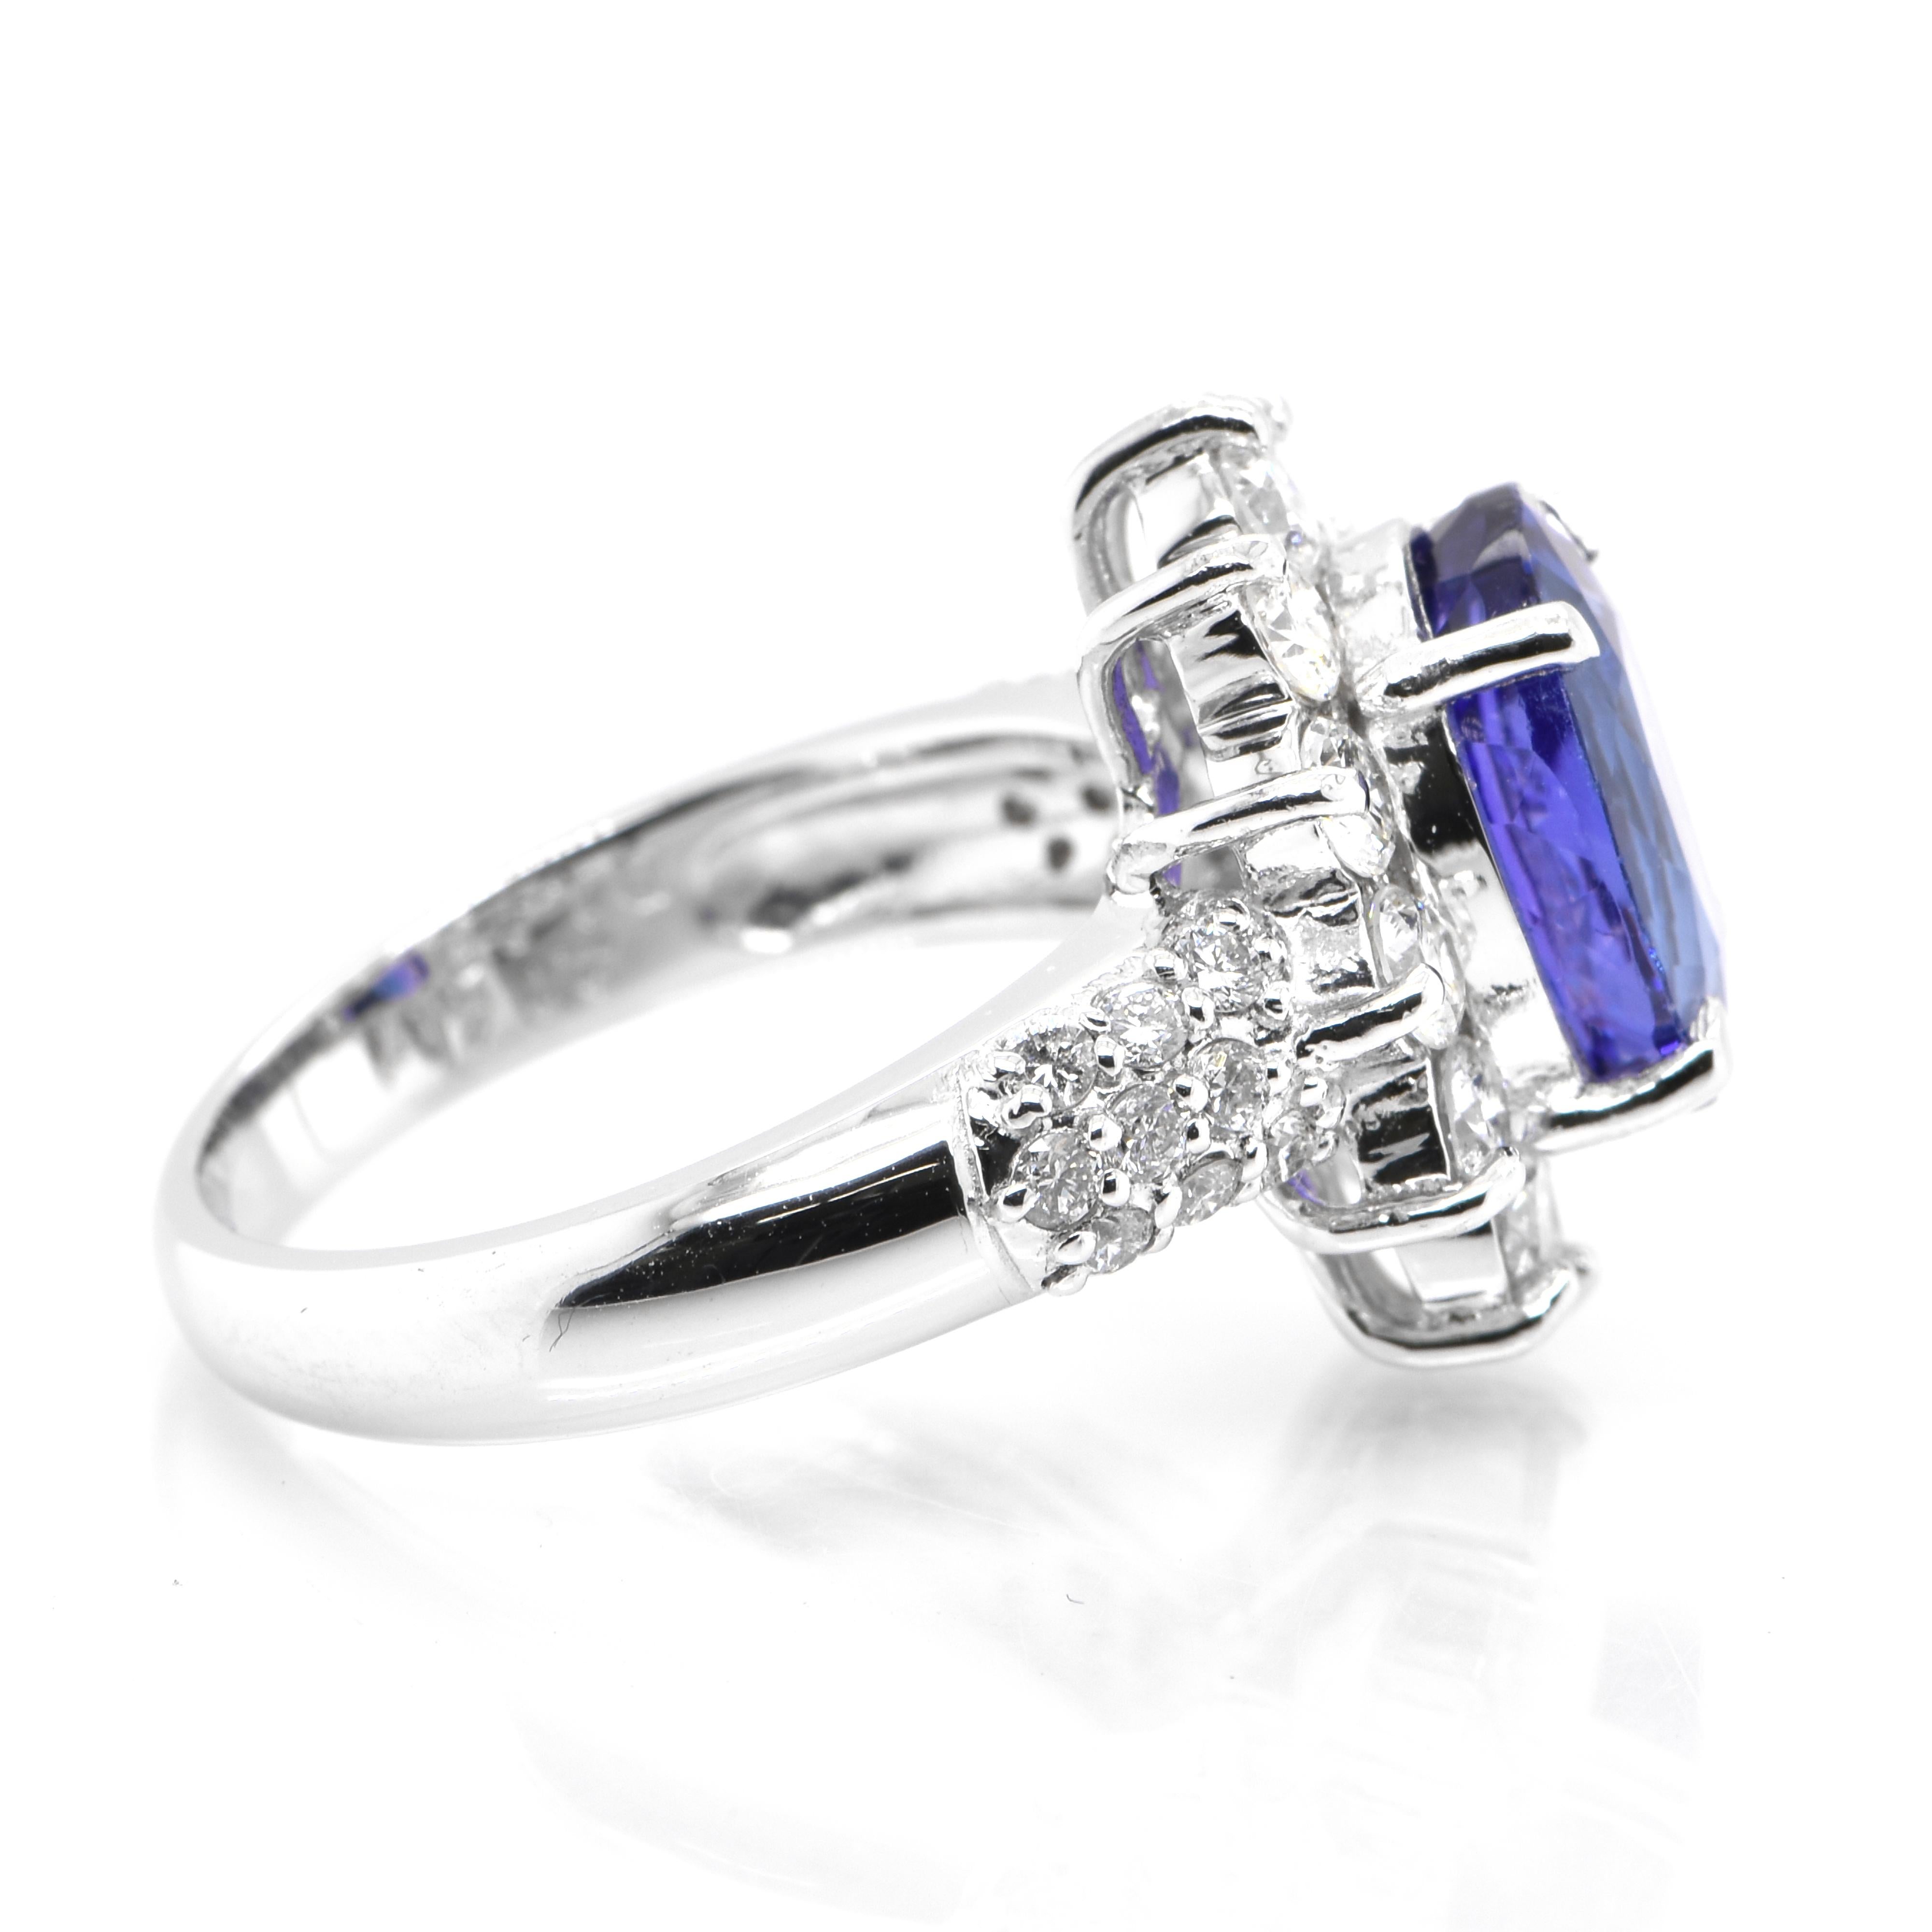 4.14 Carat Natural Oval-Cut Tanzanite and Diamond Cocktail Ring Set in Platinum In New Condition For Sale In Tokyo, JP